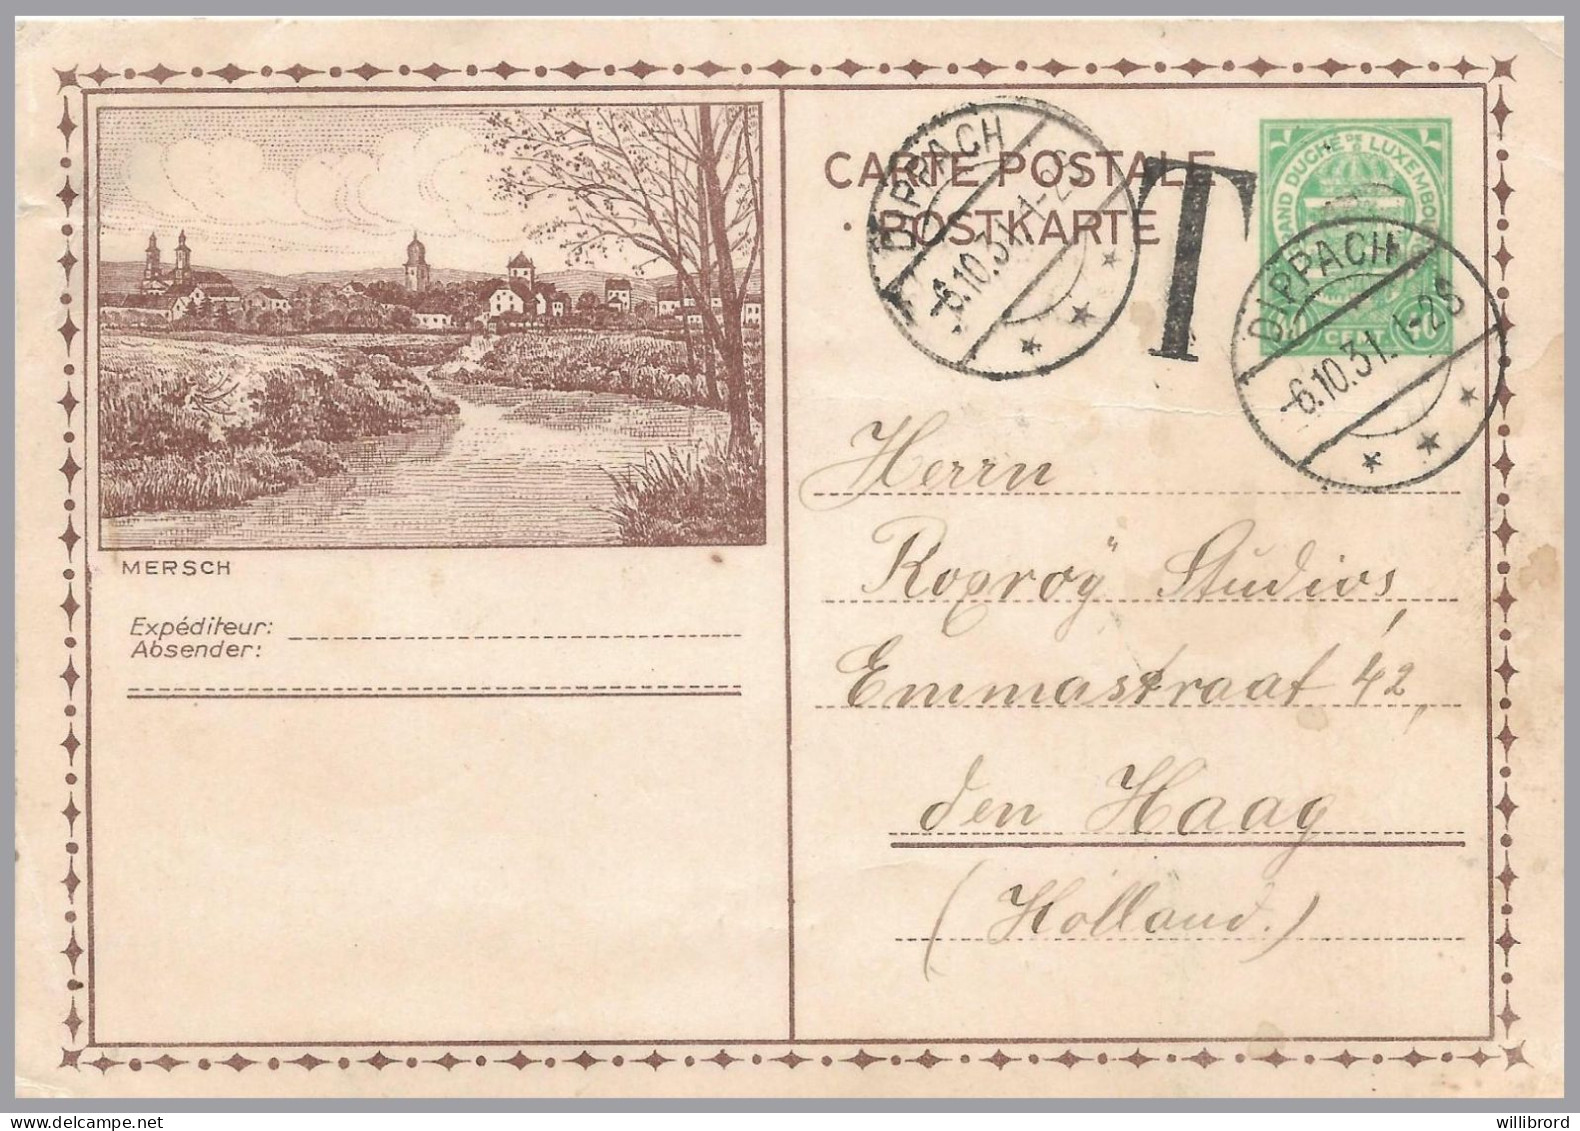 LUXEMBOURG - DIPPACH T-34 1931 - MERSCH View Arms Postal Stationery - Postage Due To Netherlands - Interi Postali